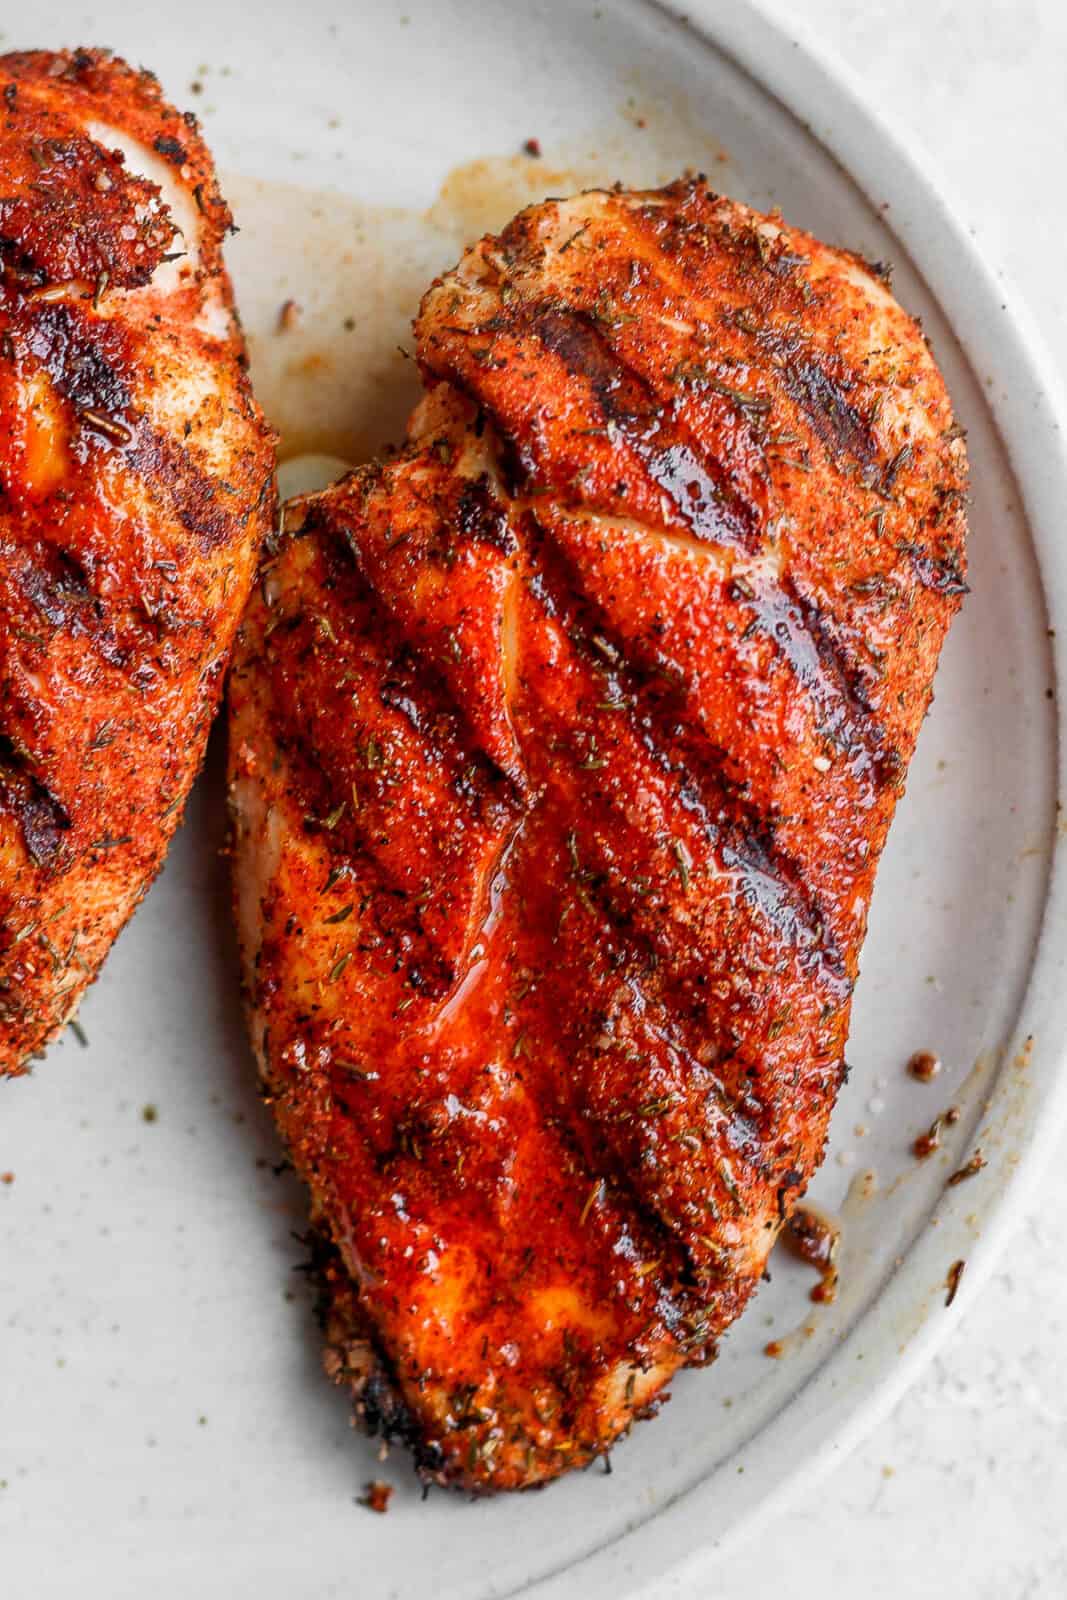 Seasoned chicken breasts that were grilled on a plate.